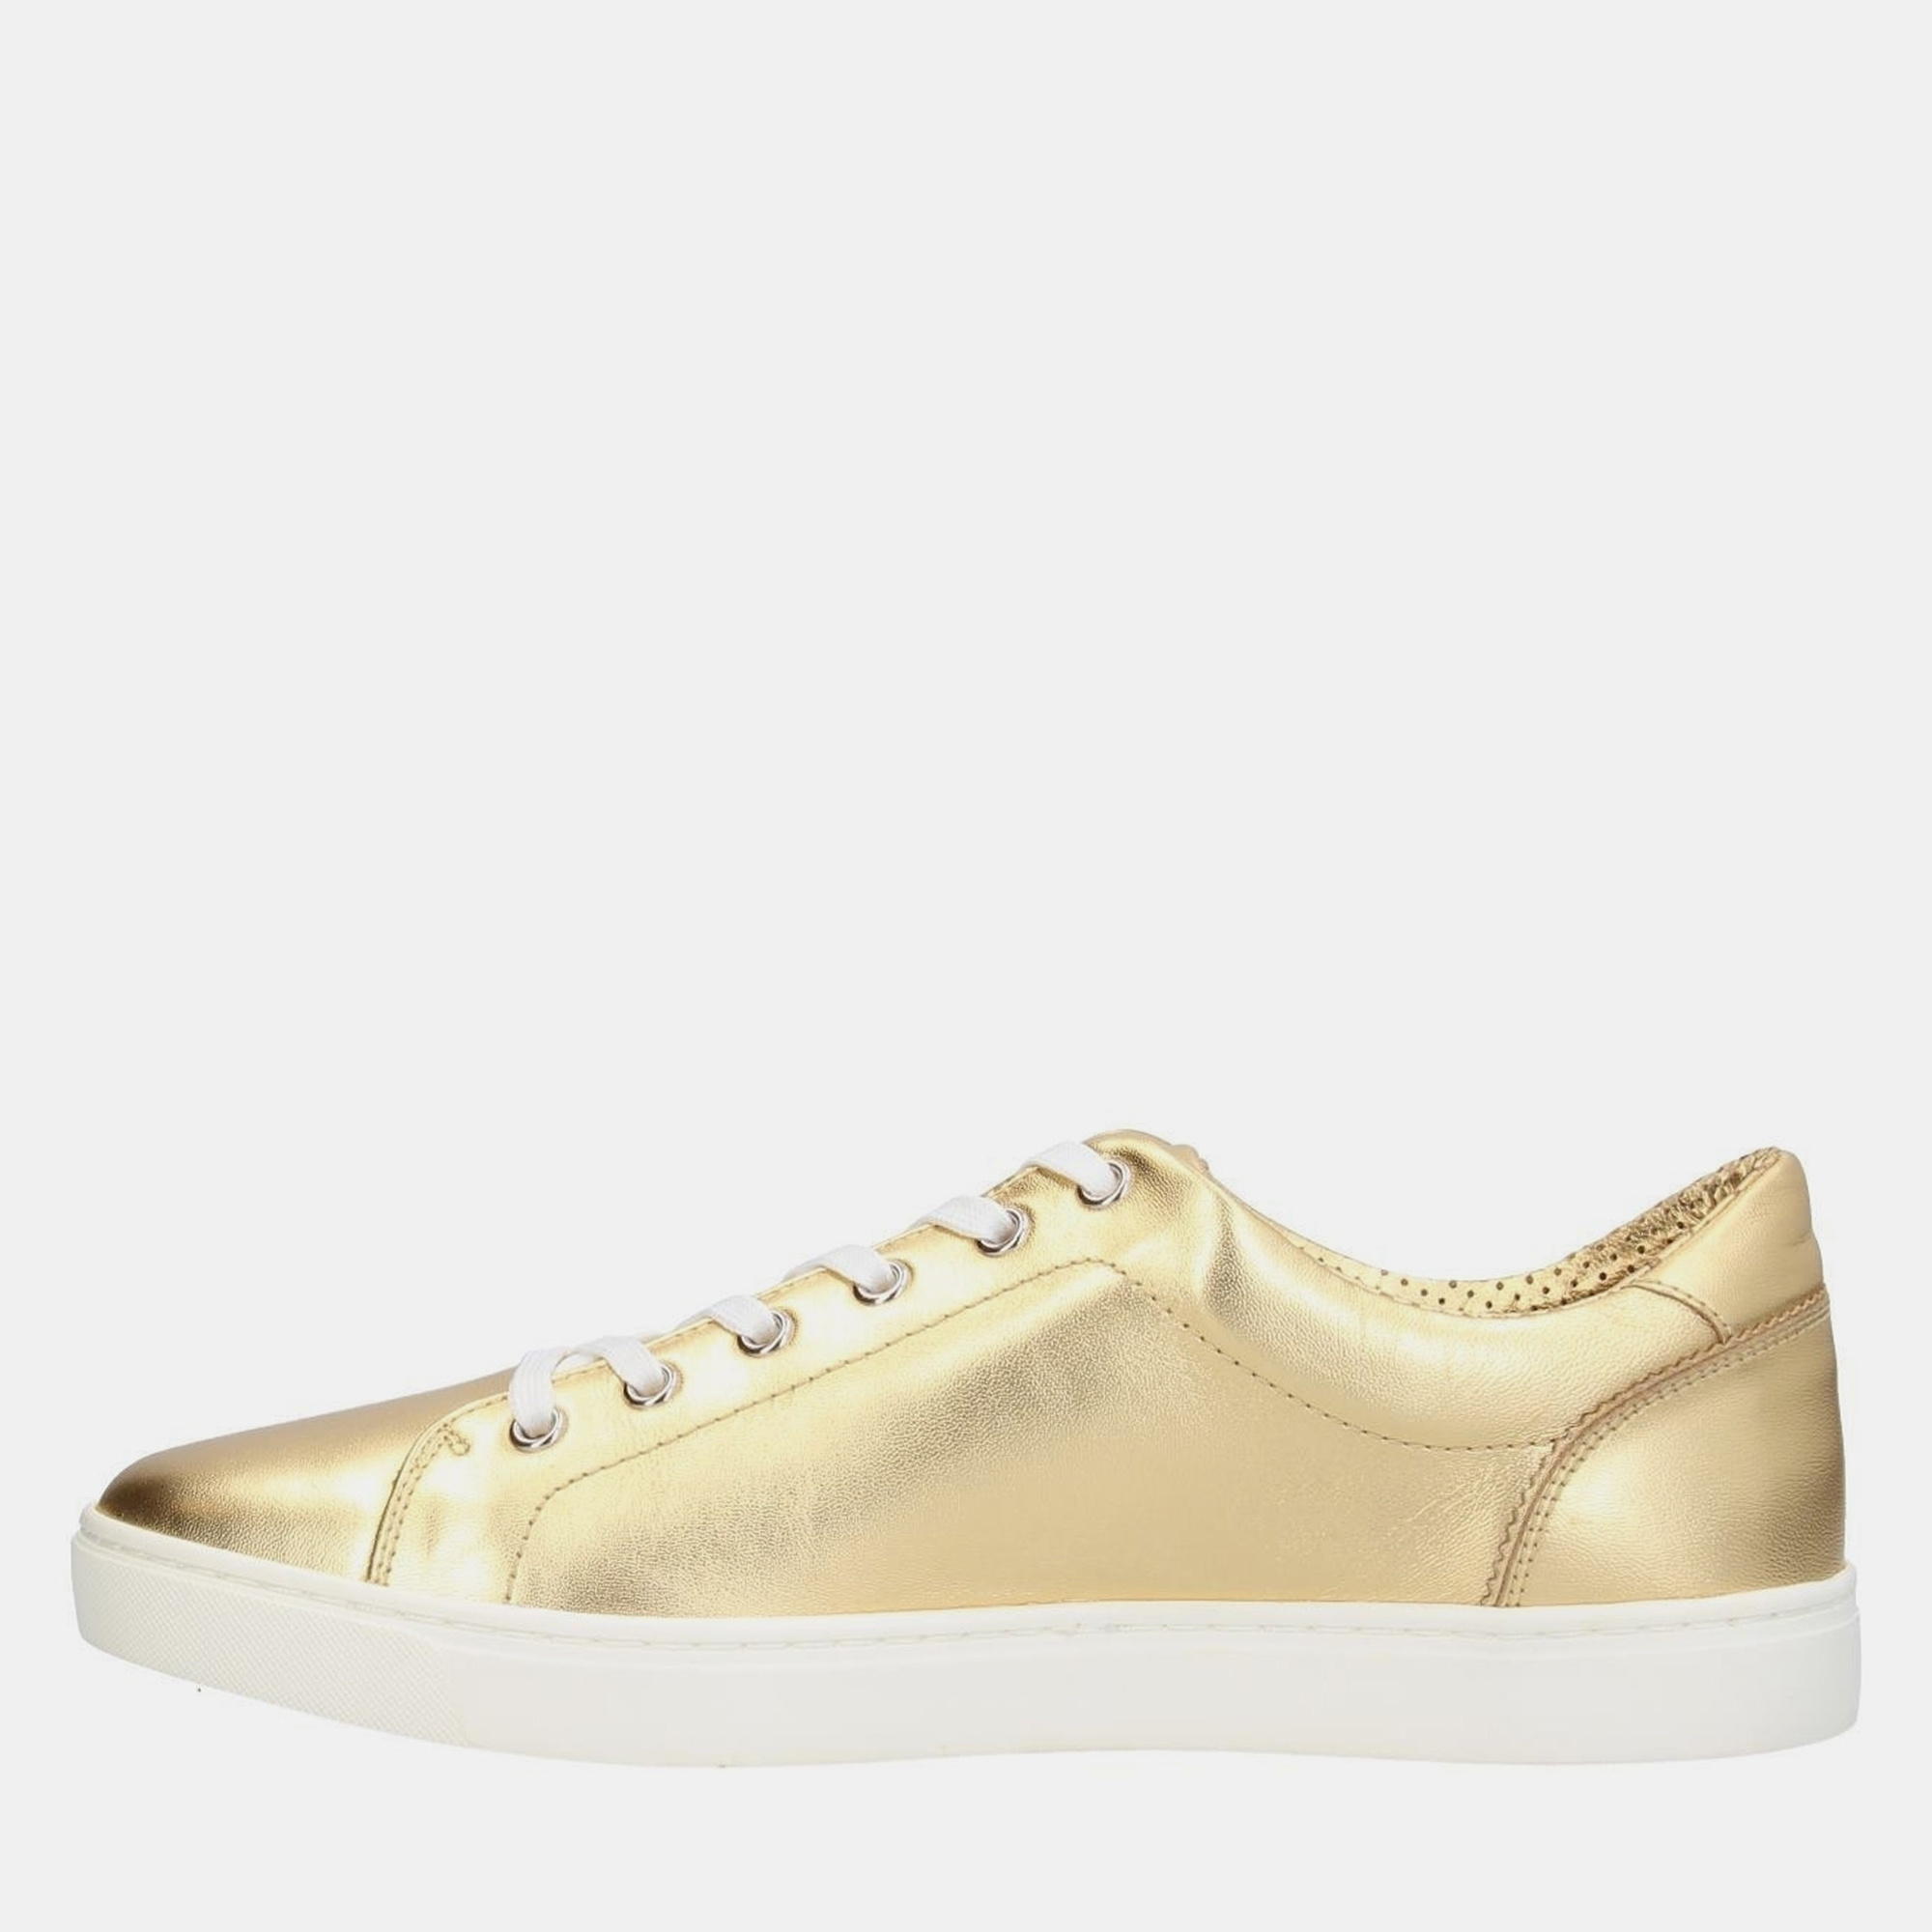 Dolce & gabbana leather low top sneakers 41